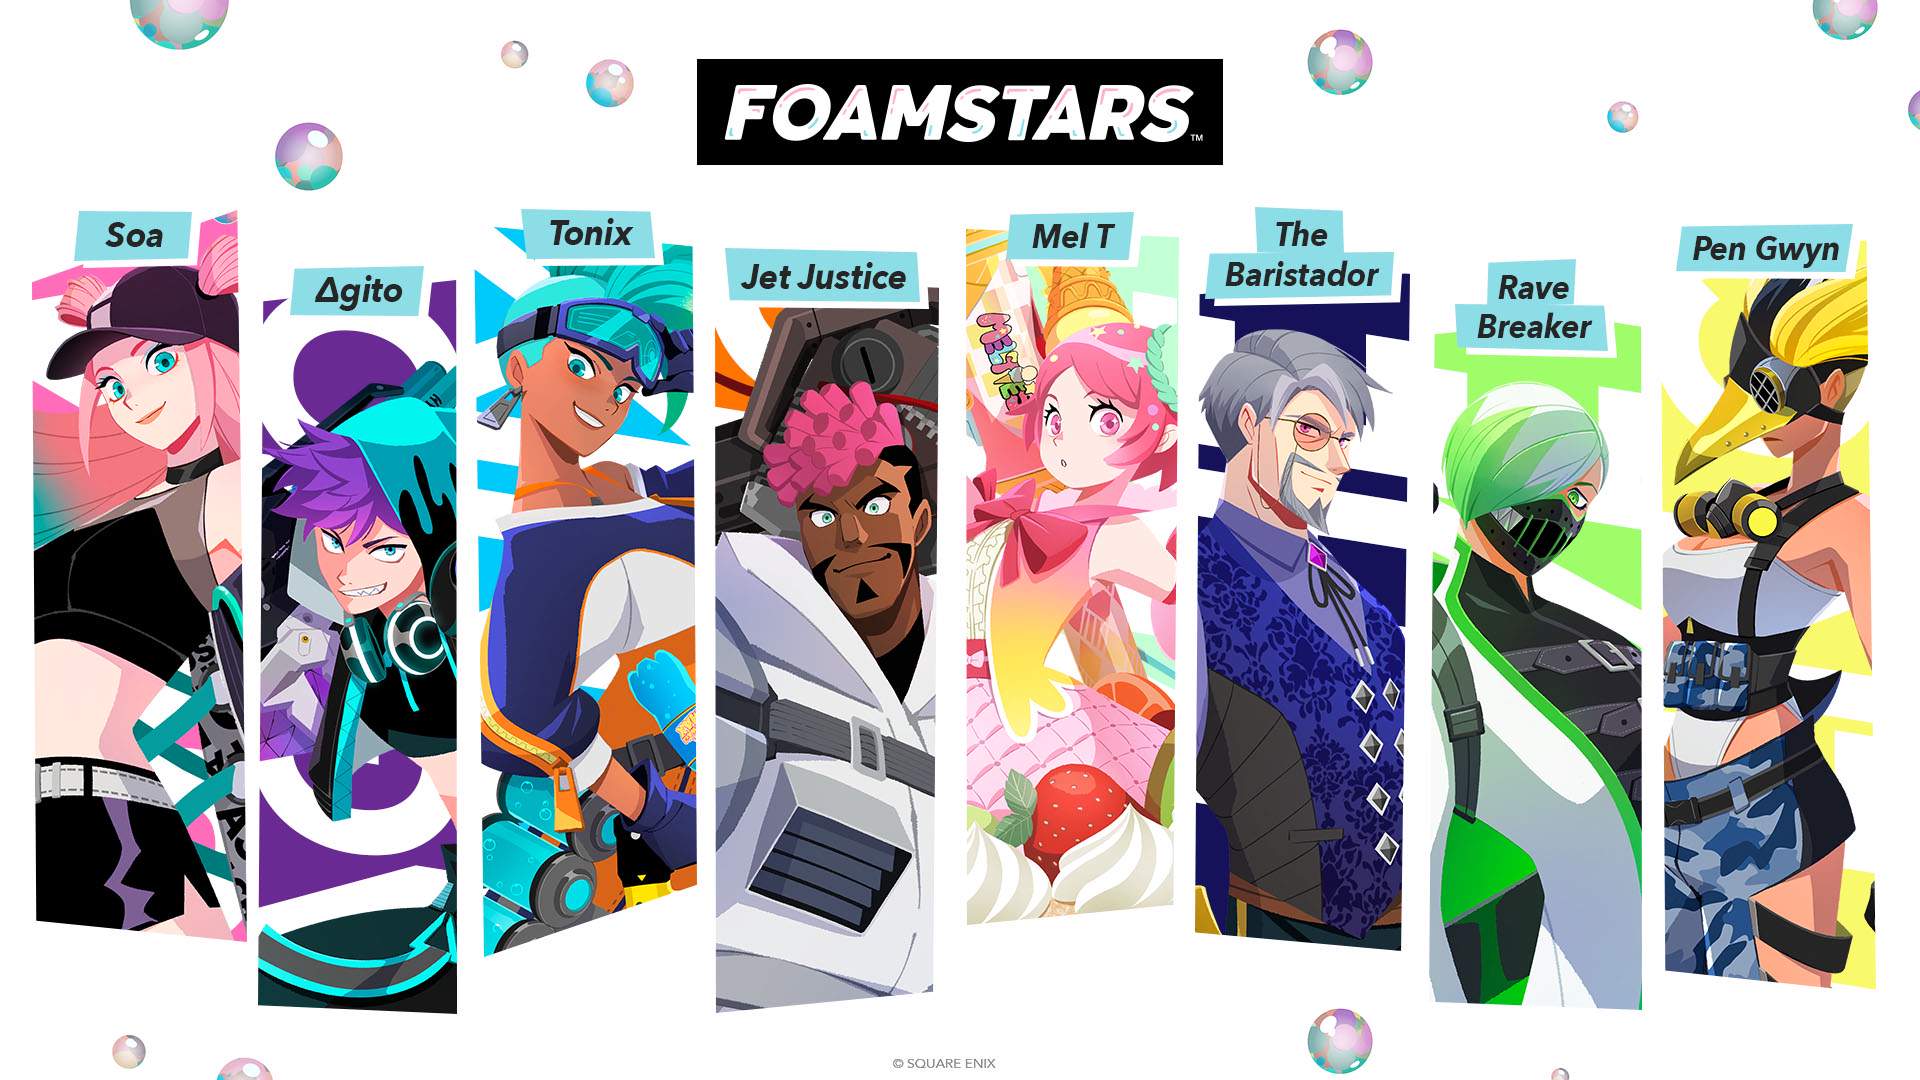 Foamstars open beta takes place at the end of September